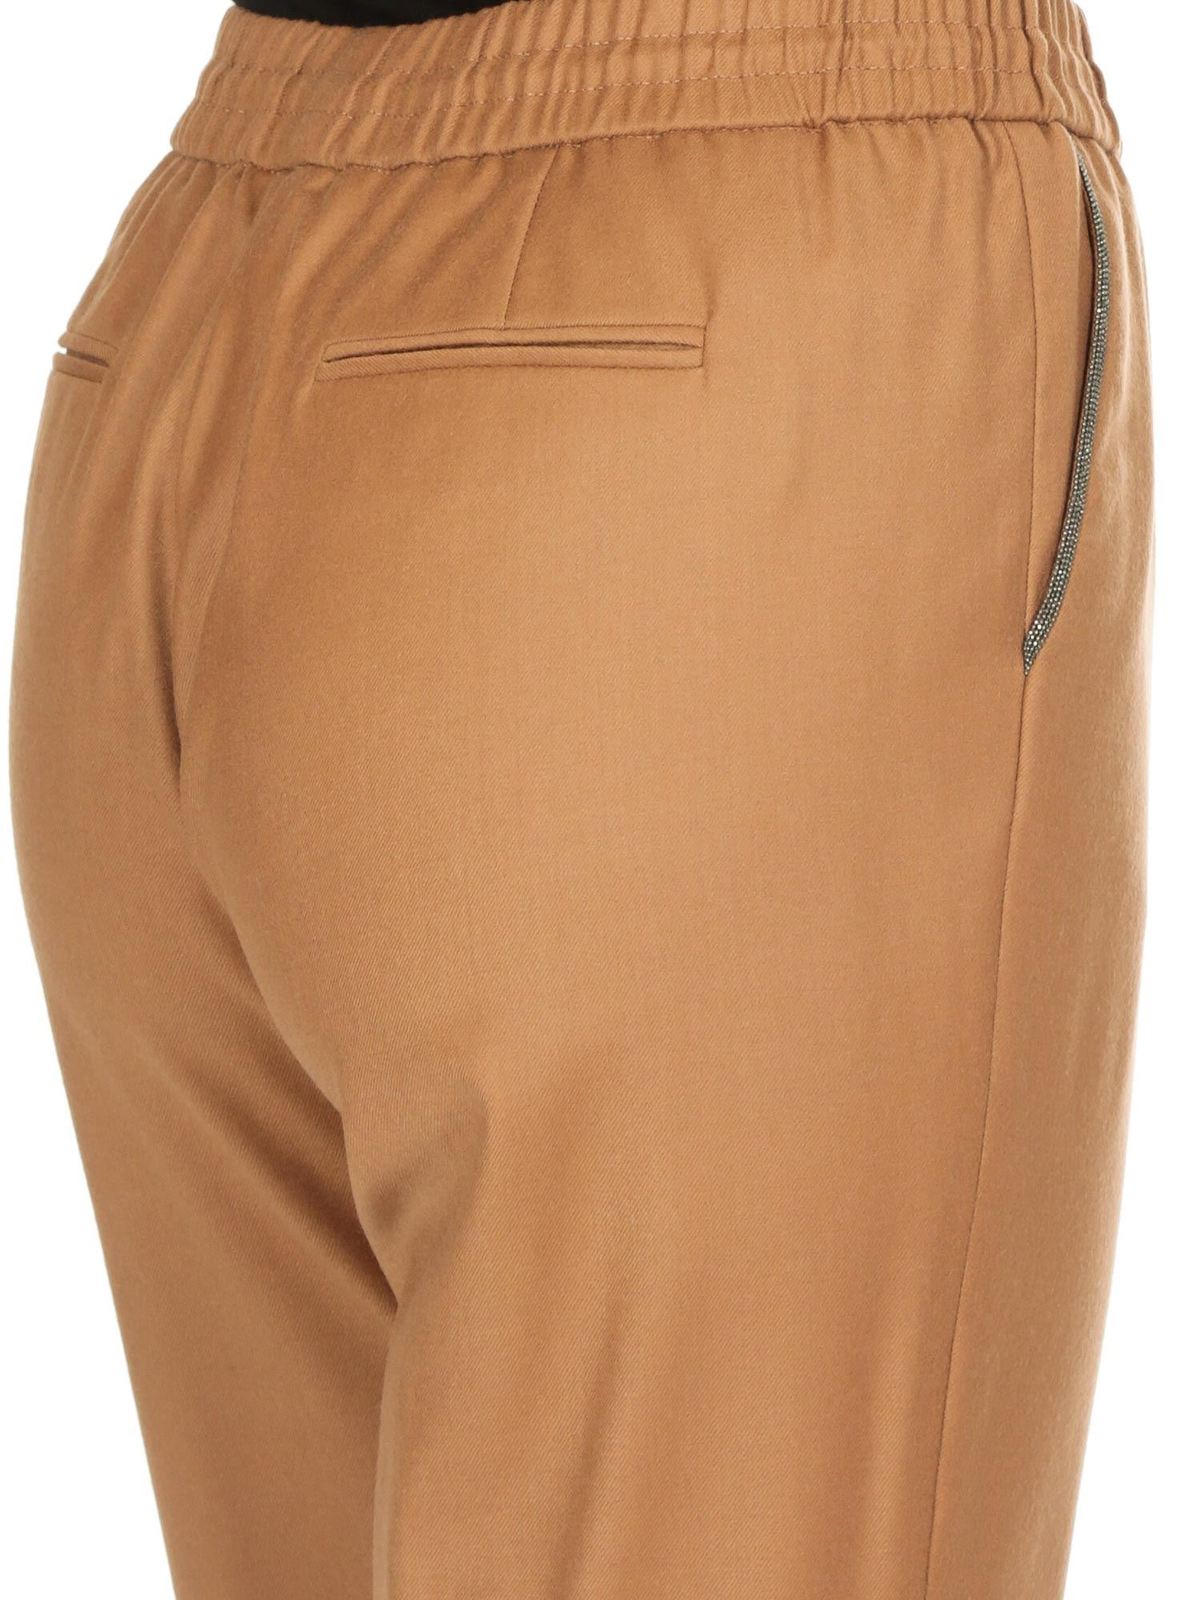 Casual trousers Fabiana Filippi Pants in camel color with micro-beads  PAD129W826A4211209